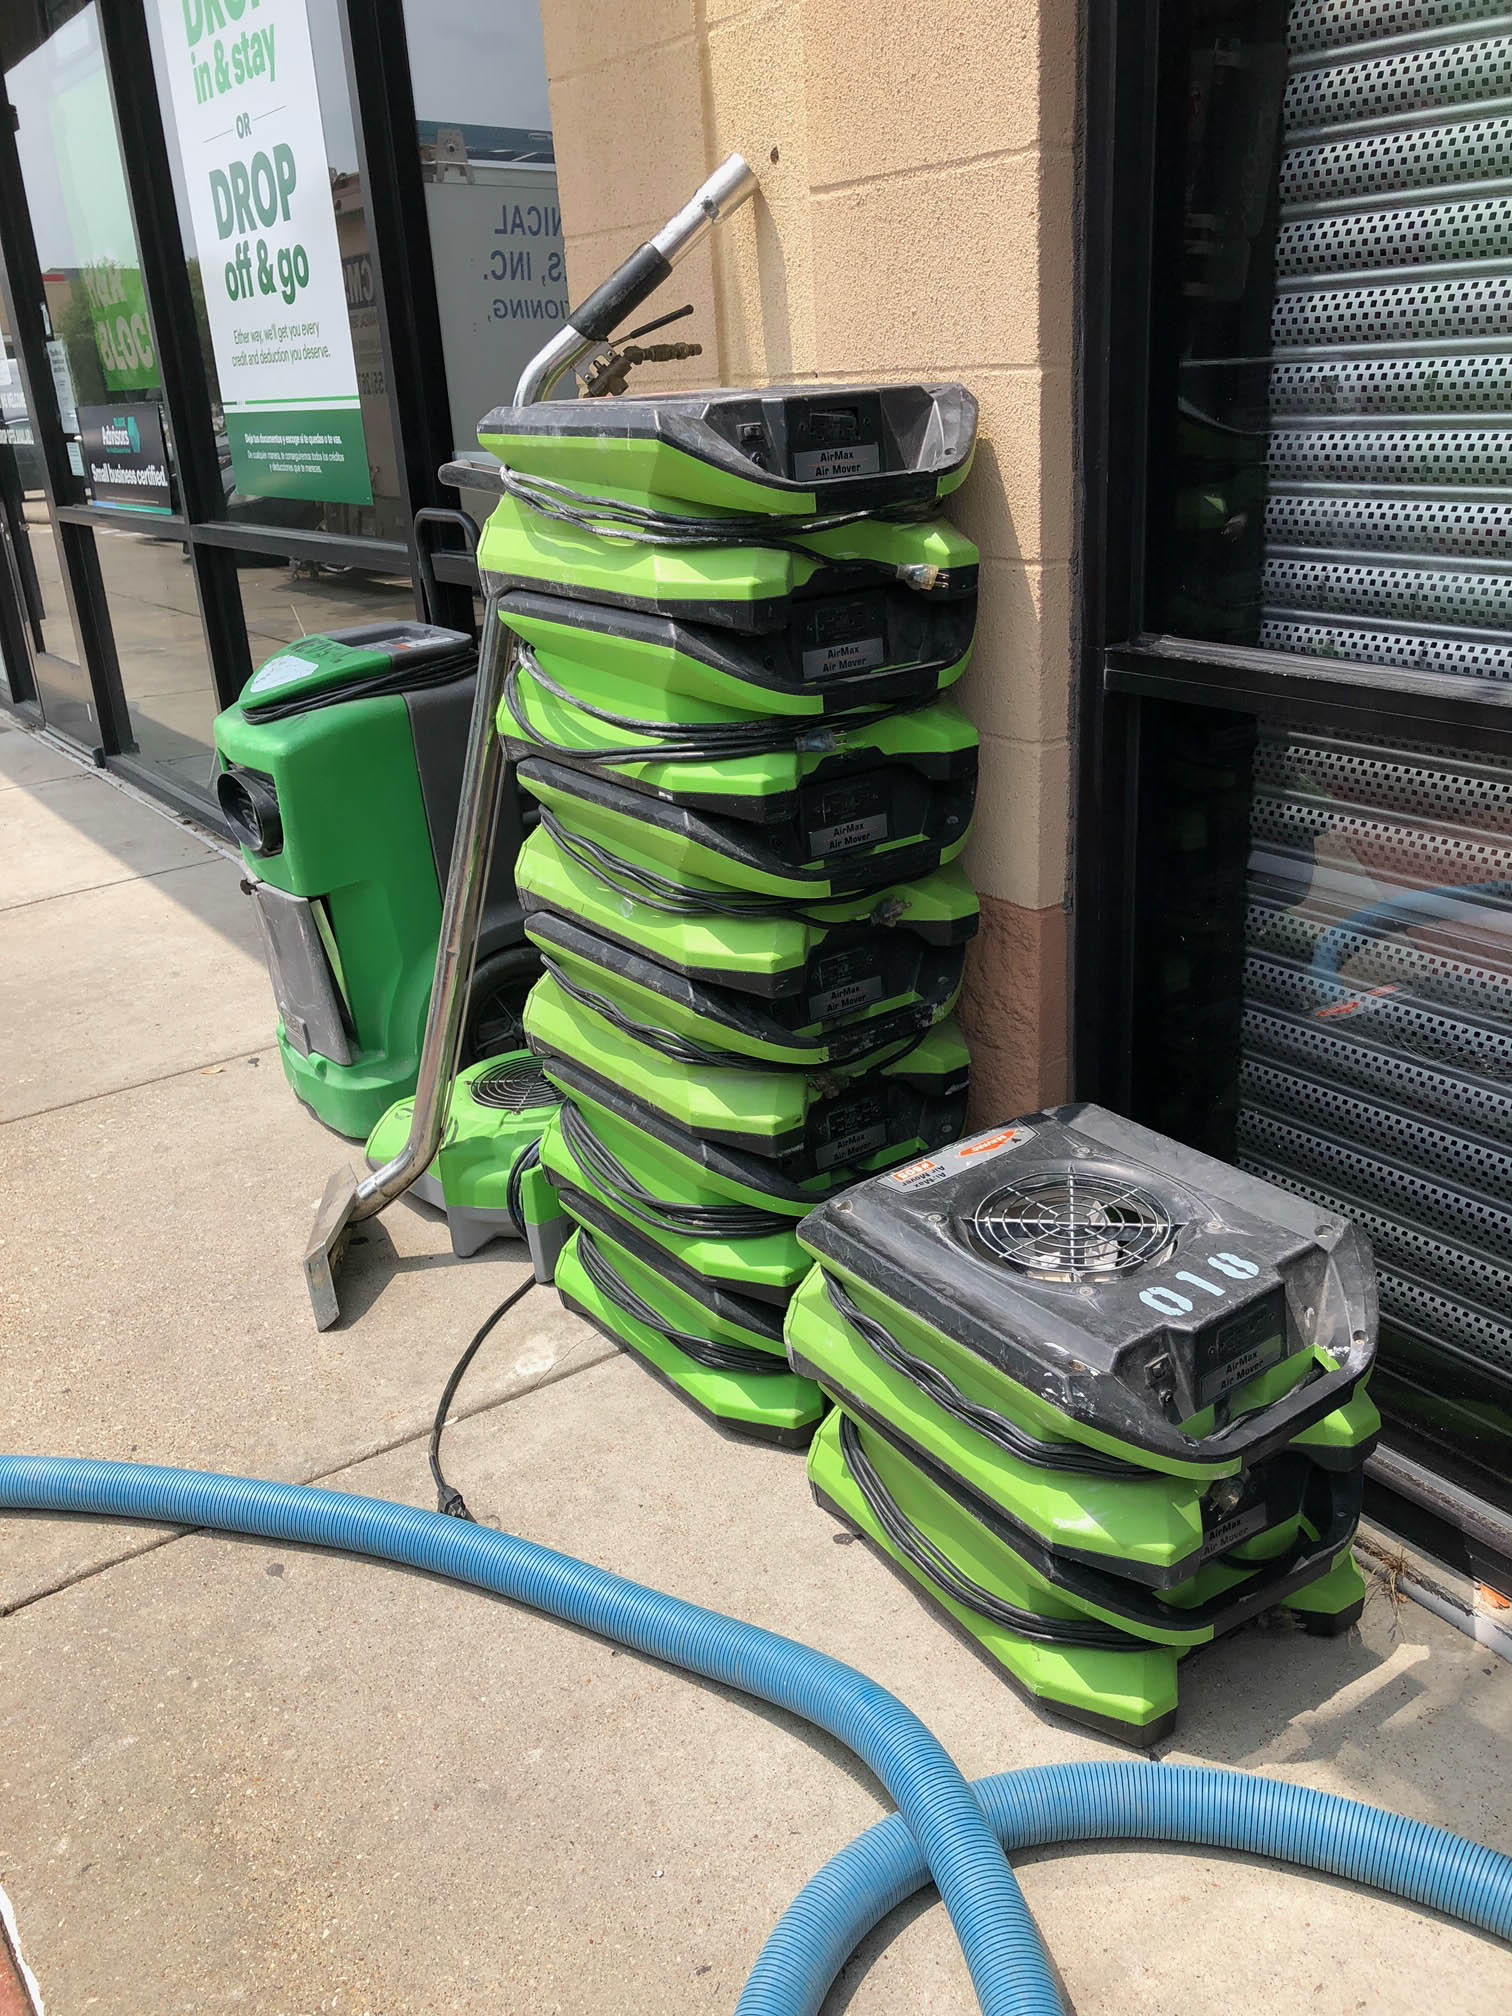 Our equipment, expertise and training makes SERVPRO of South Garland the first choice in Club Creek, TX when residential and commercial water damage occurs. We are a call away to help!